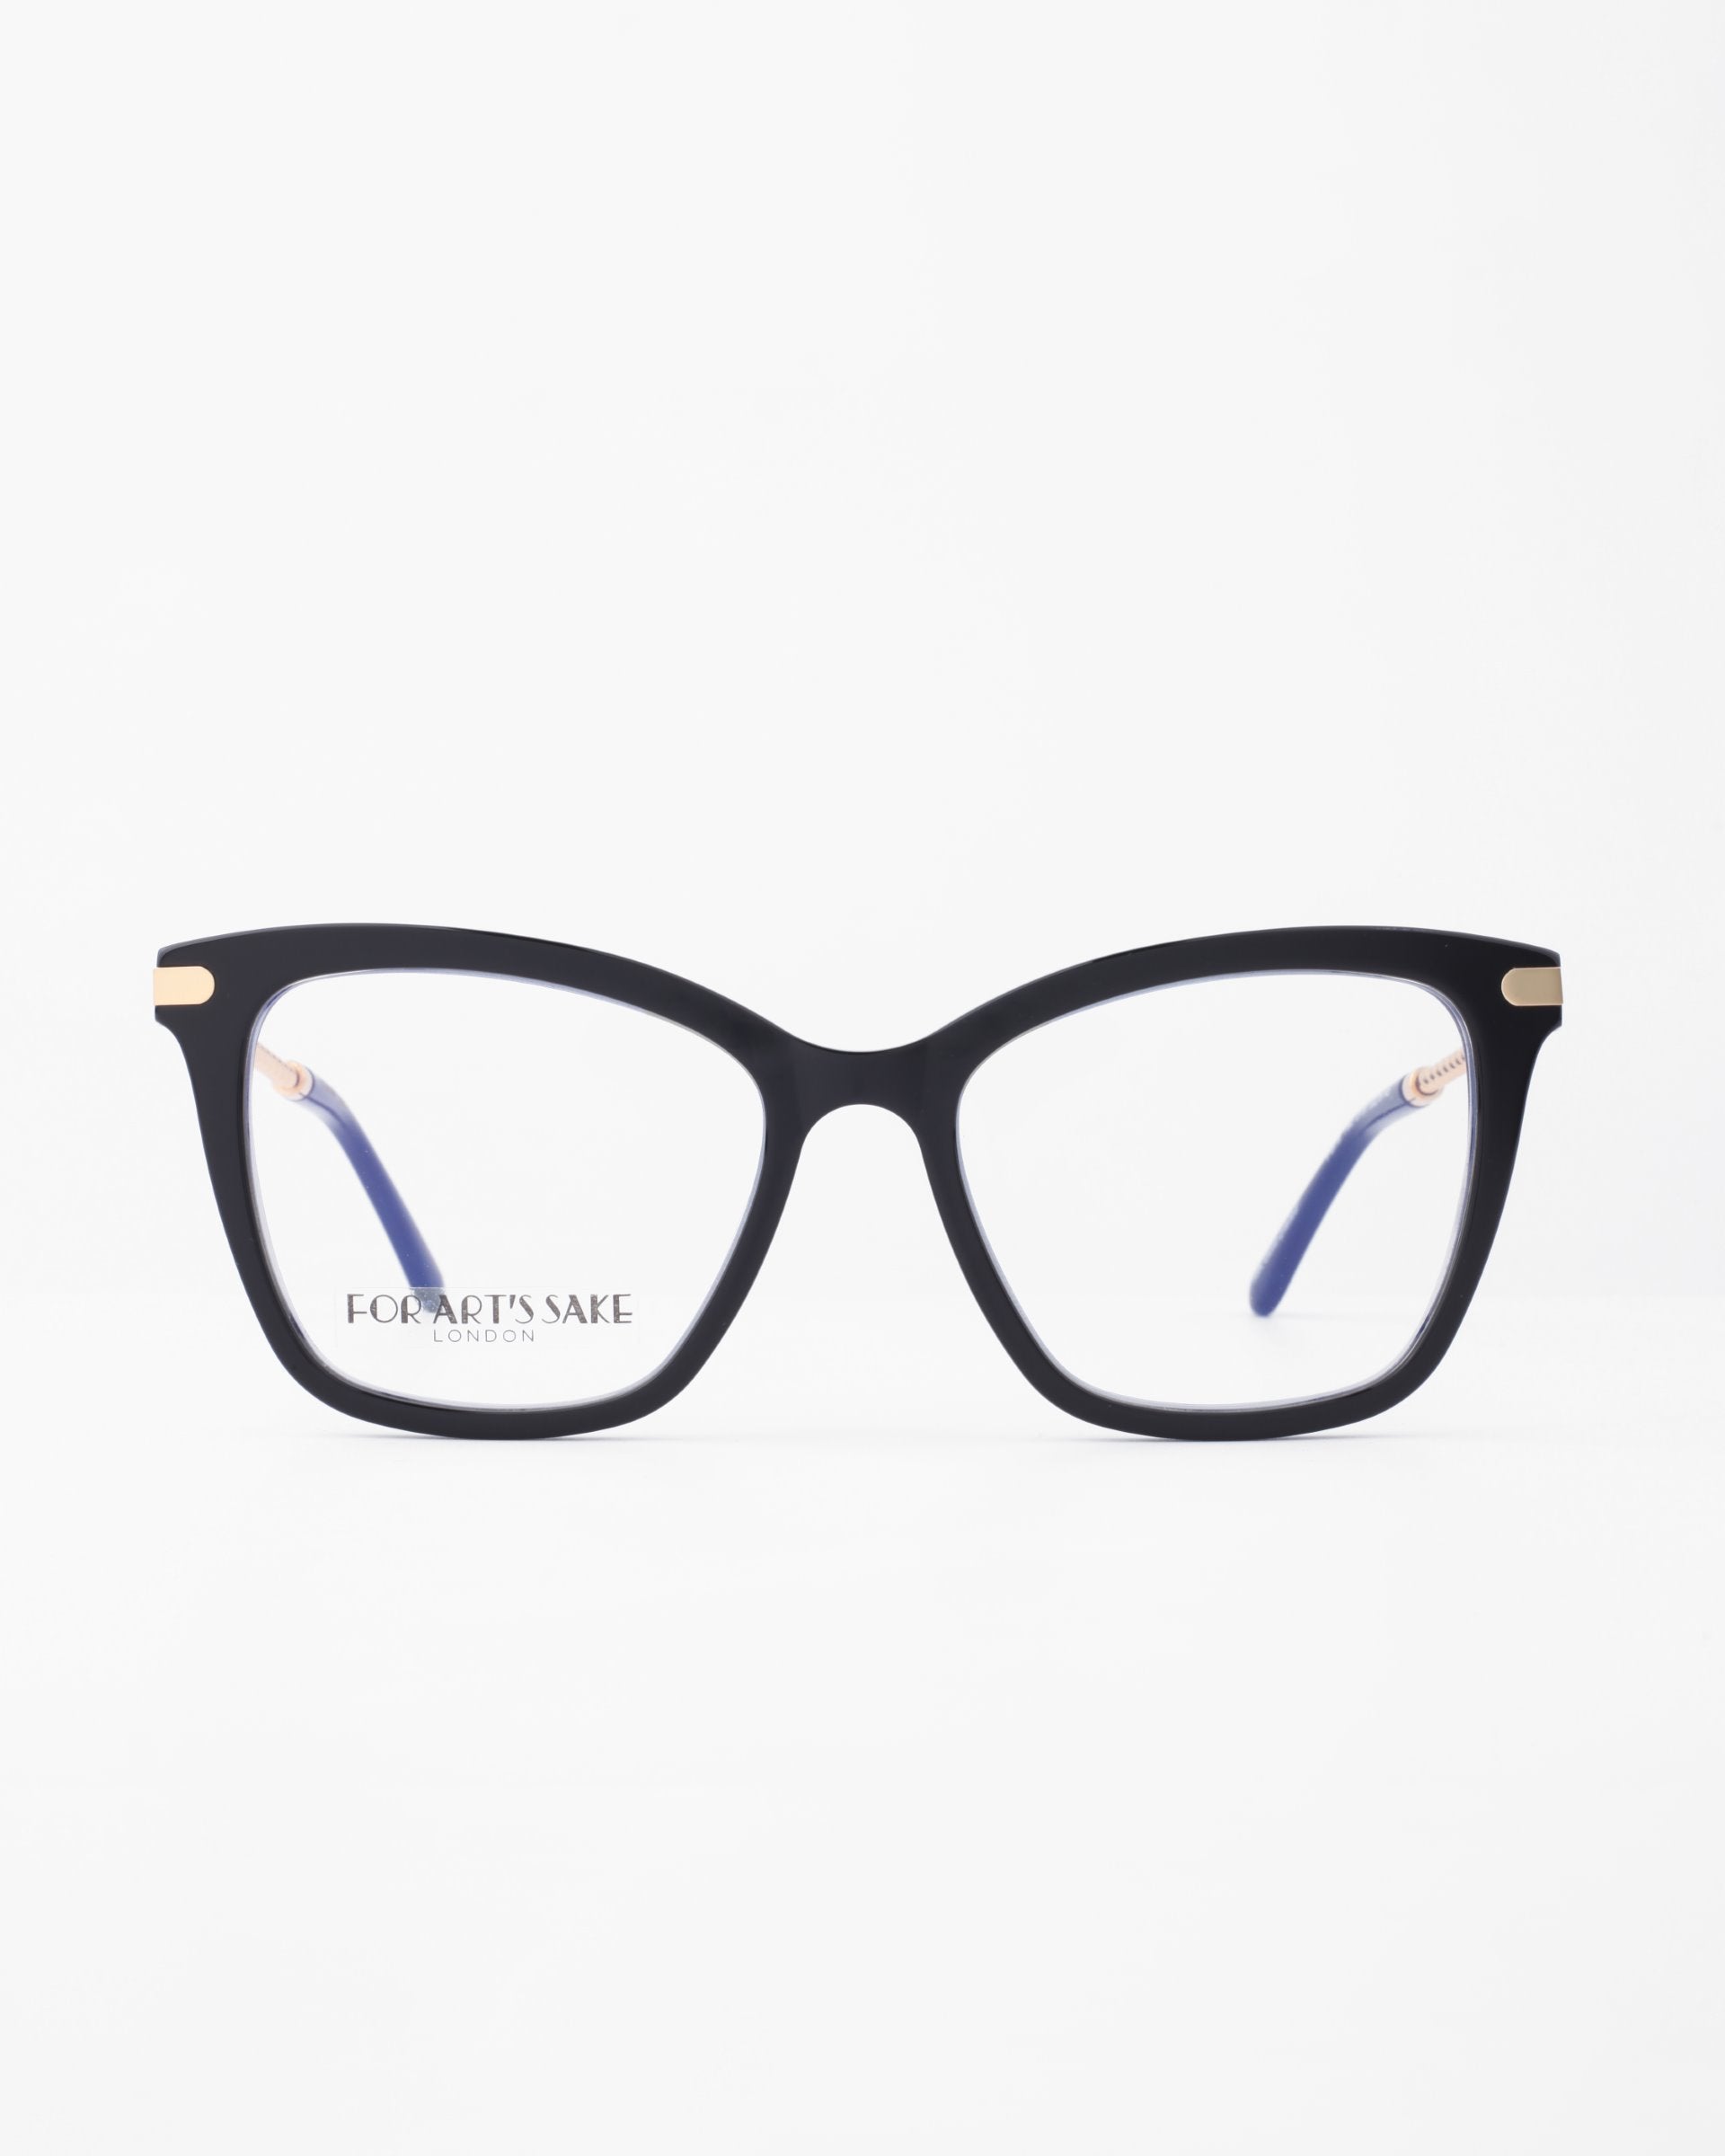 A pair of black, rectangular eyeglass frames with the brand name &quot;For Art&#39;s Sake®&quot; engraved on one of the lenses. The inner sides of the temples are blue, and the top corners feature small gold accents. These Paris Two frames include a blue light filter for added eye comfort. The background is plain white.